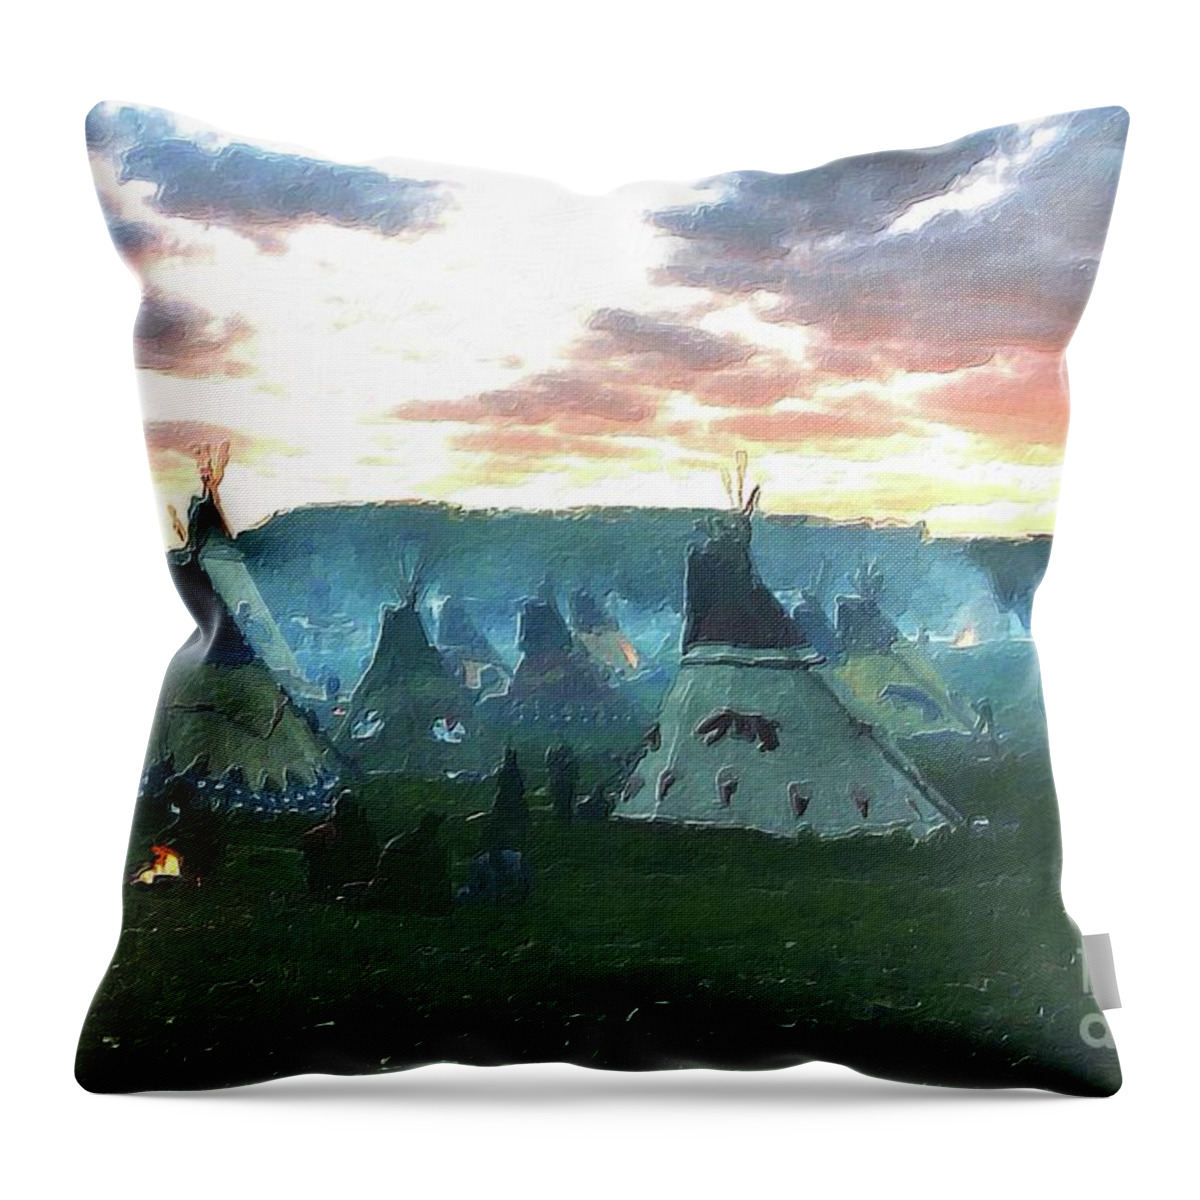 Native American Indian village at sunset with mountains in the background  Throw Pillow by Celine Bisson - Pixels